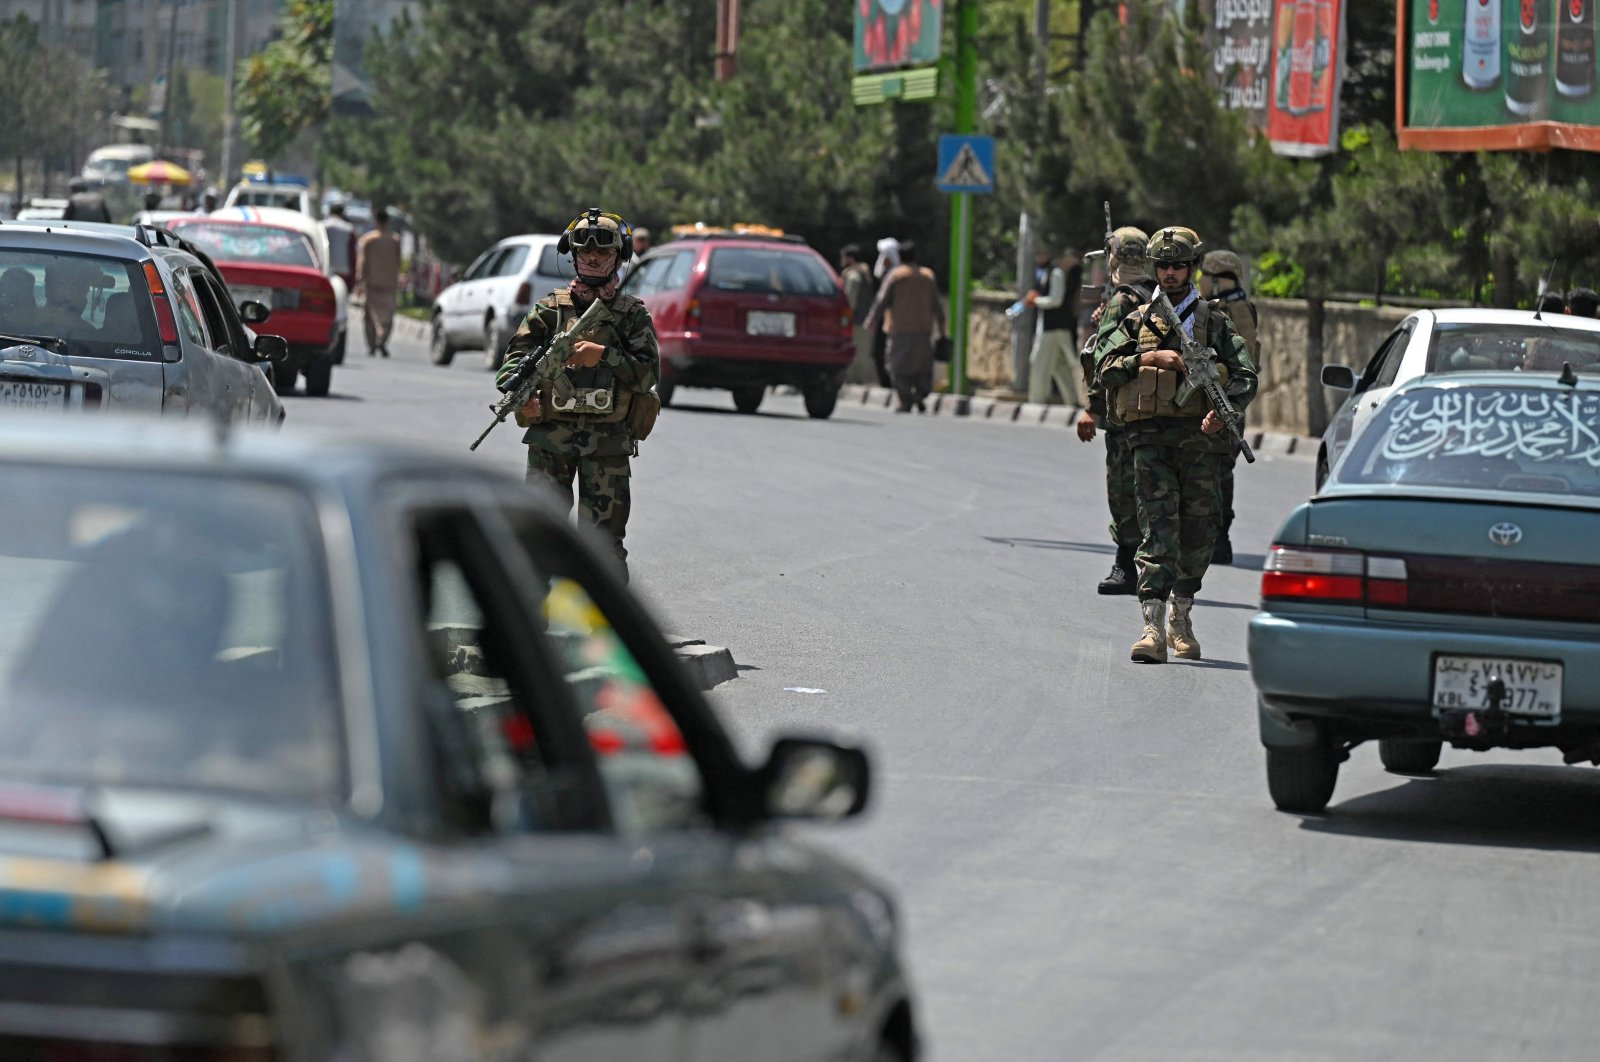 Taliban Fateh fighters, a "special forces" unit, patrol along a street in Kabul as suicide bomb threats hung over the final phase of the US military's airlift operation, Kabul, Afghanistan, August 29, 2021,  (AFP Photo)